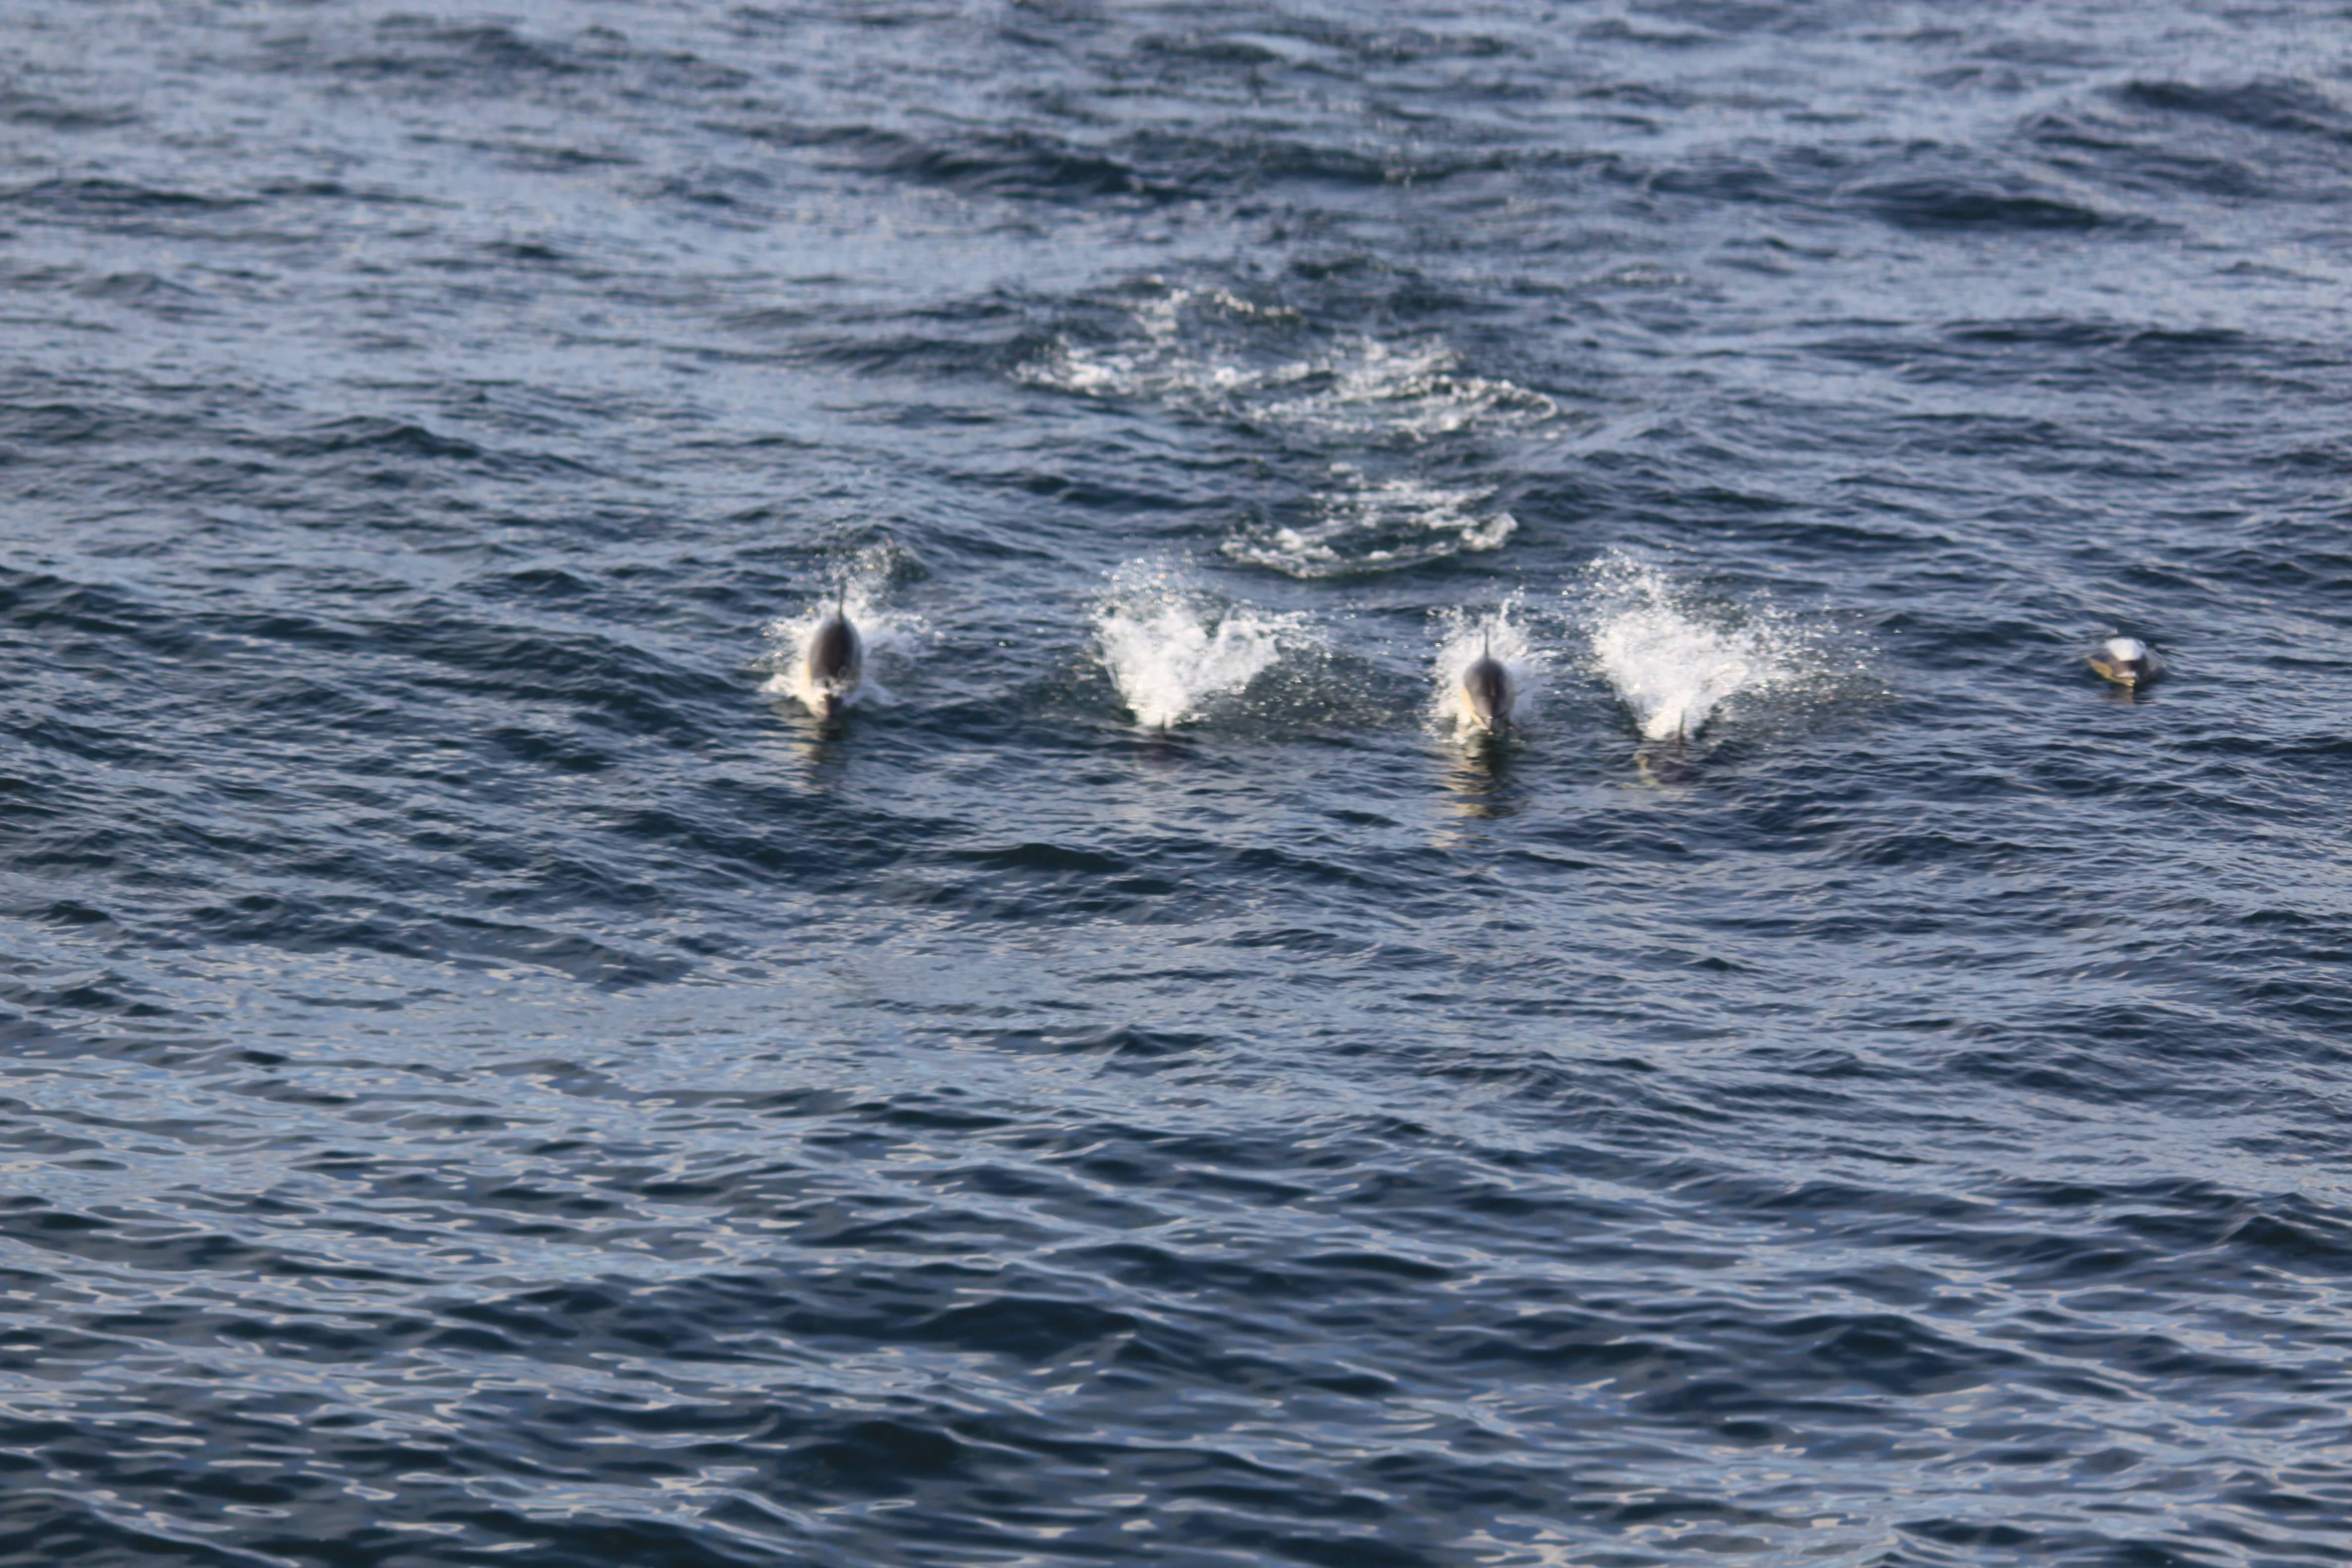 Dolphins in the Northern Atlantic